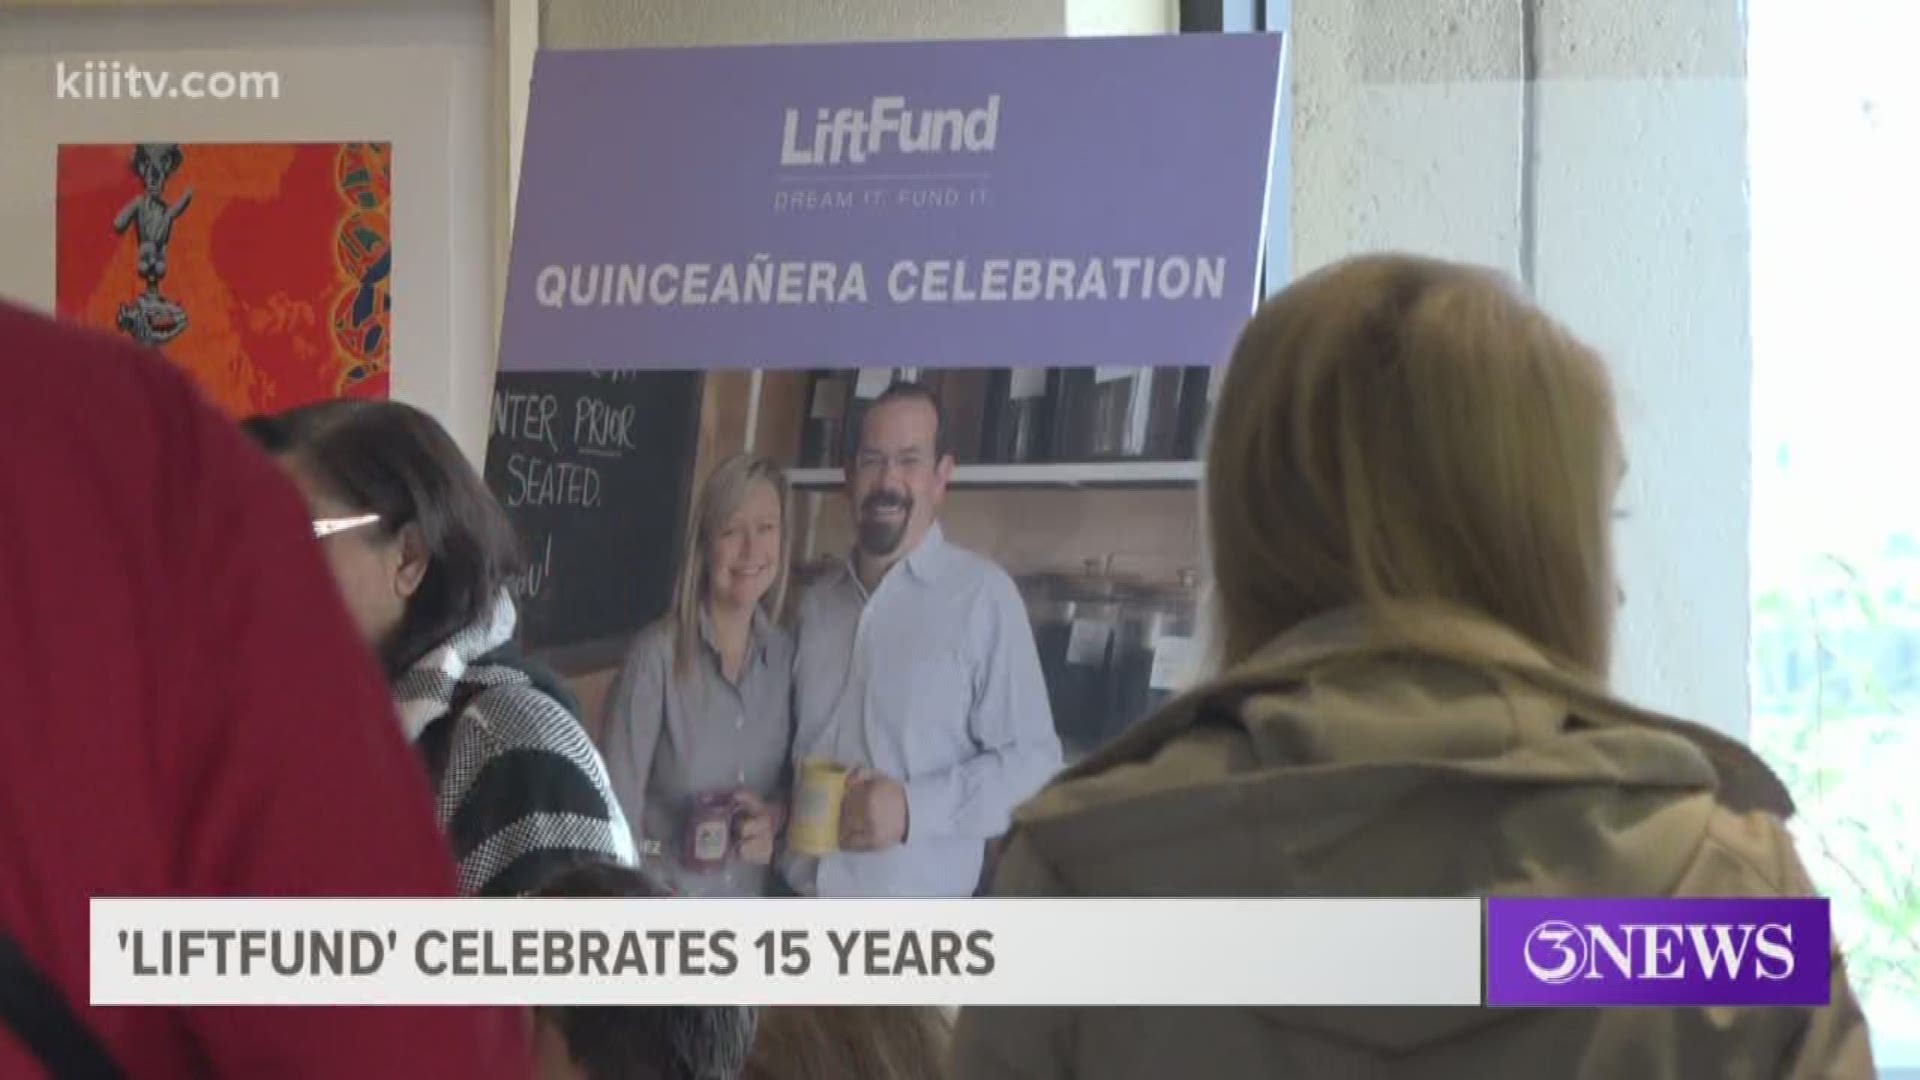 LiftFund was started 15 years ago as a way for potential small business owners to get the financial help they needed when traditional routes were not open.